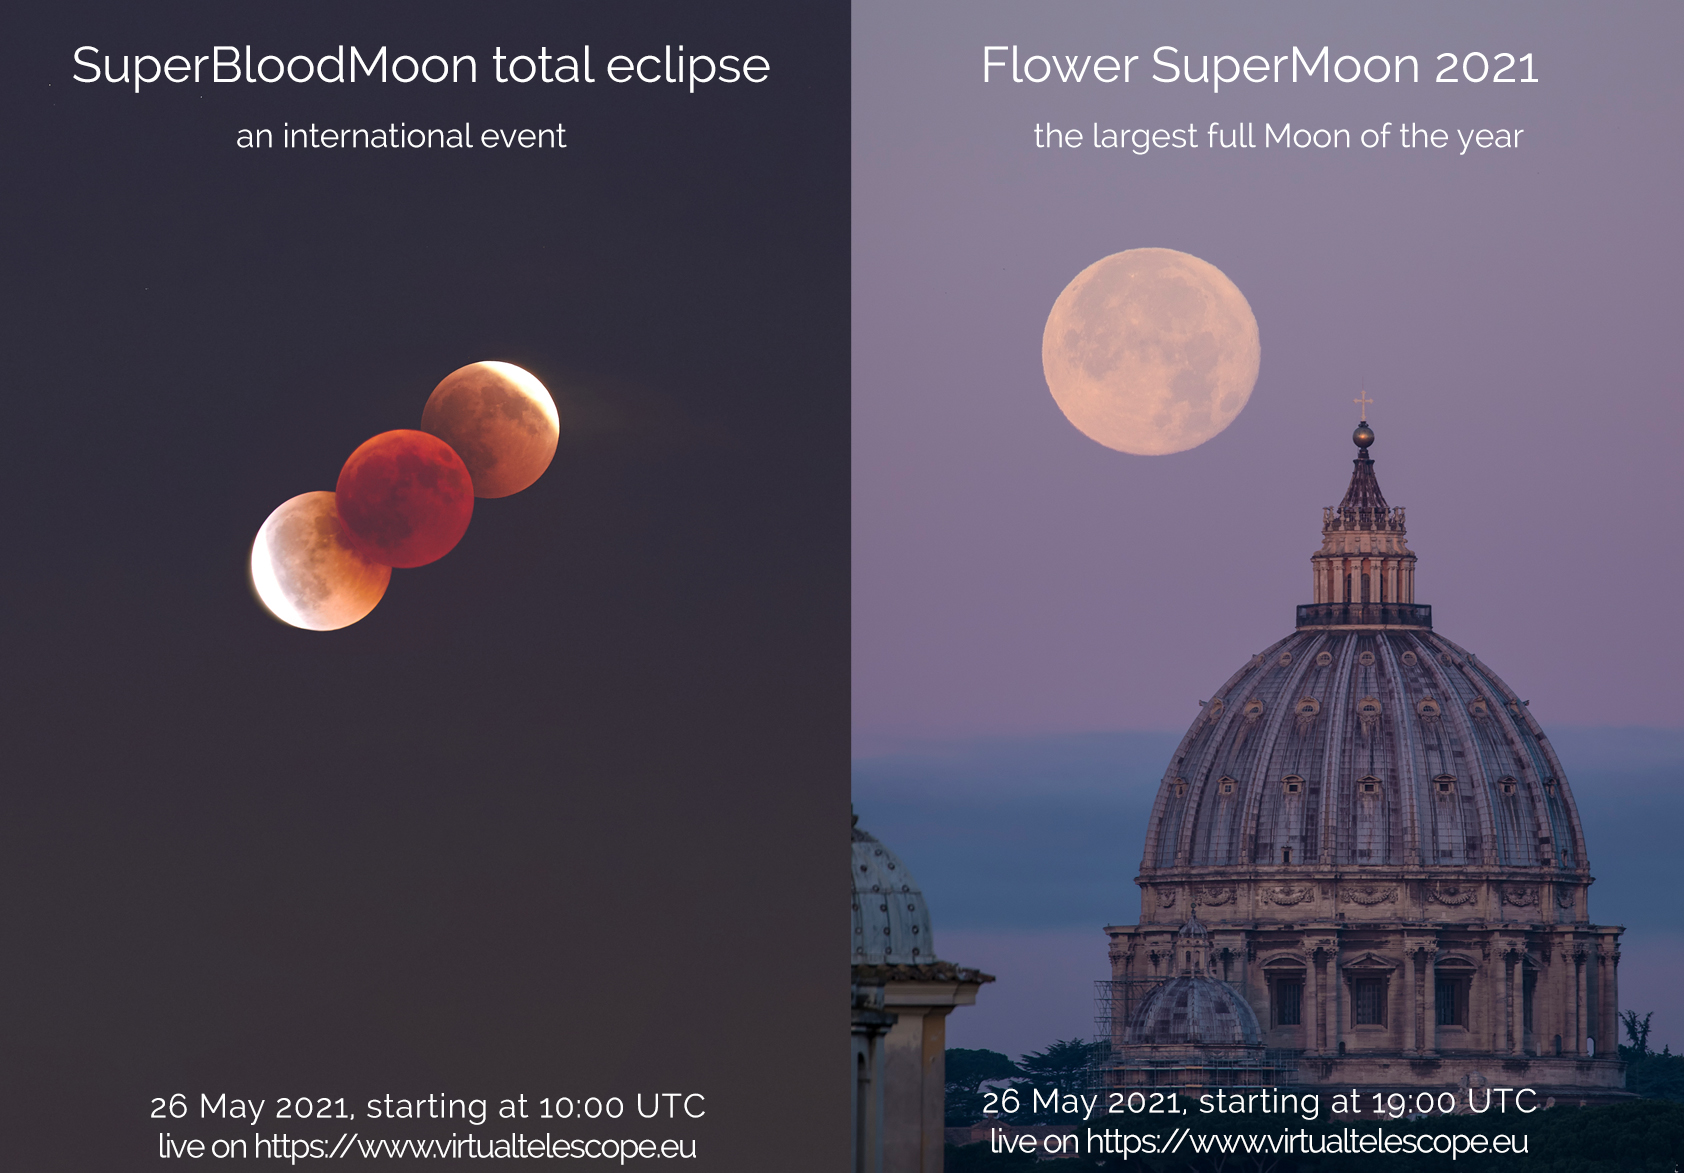 SuperBloodMoon 2021: poster of the event.